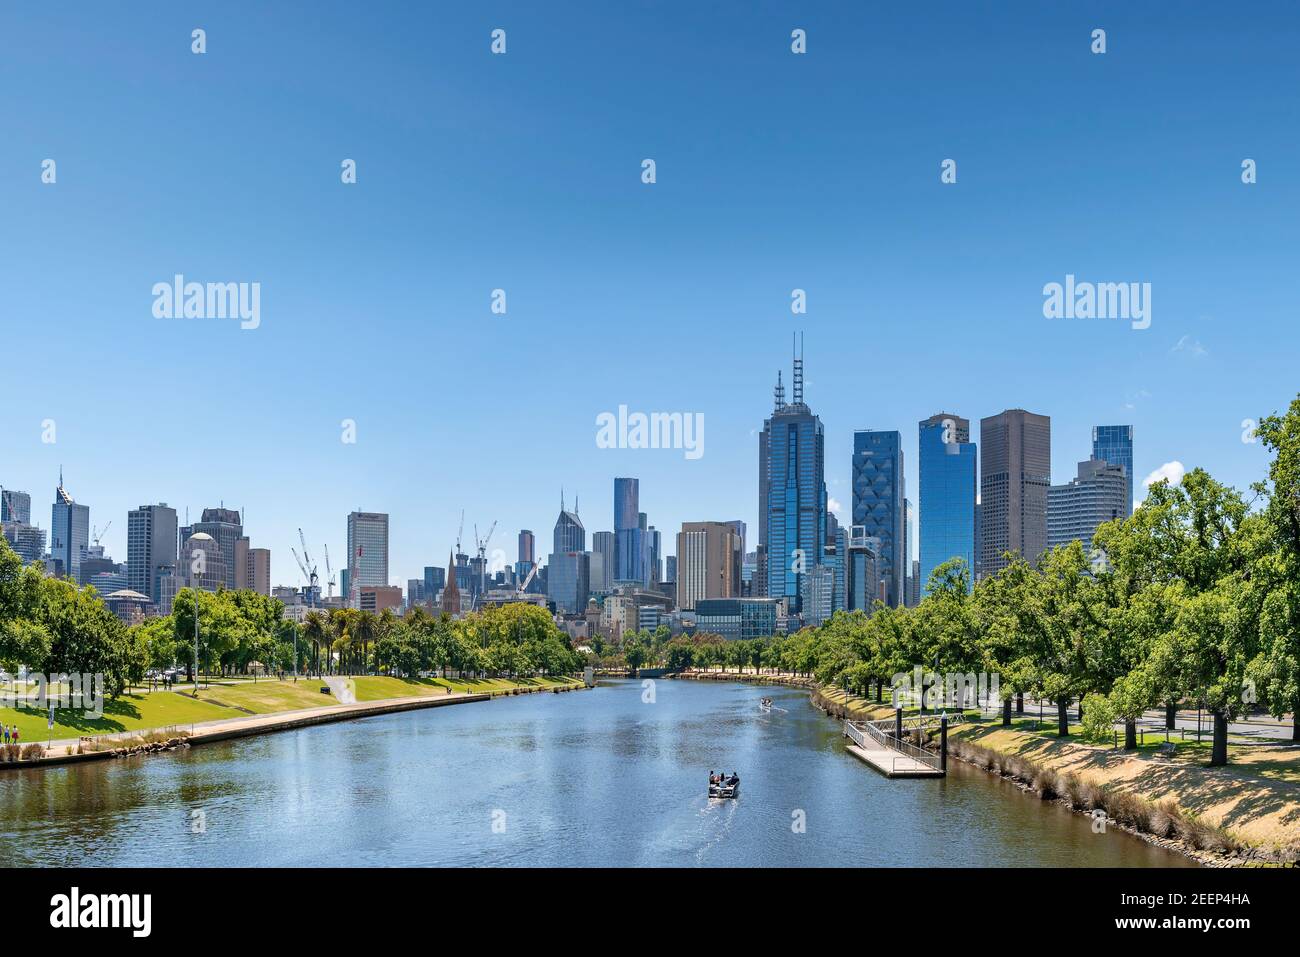 Melbourne, Australia: January 17th, 2021: A modern cityscape with office corporate buildings and skyscrapers, Melbourne, Australia Stock Photo